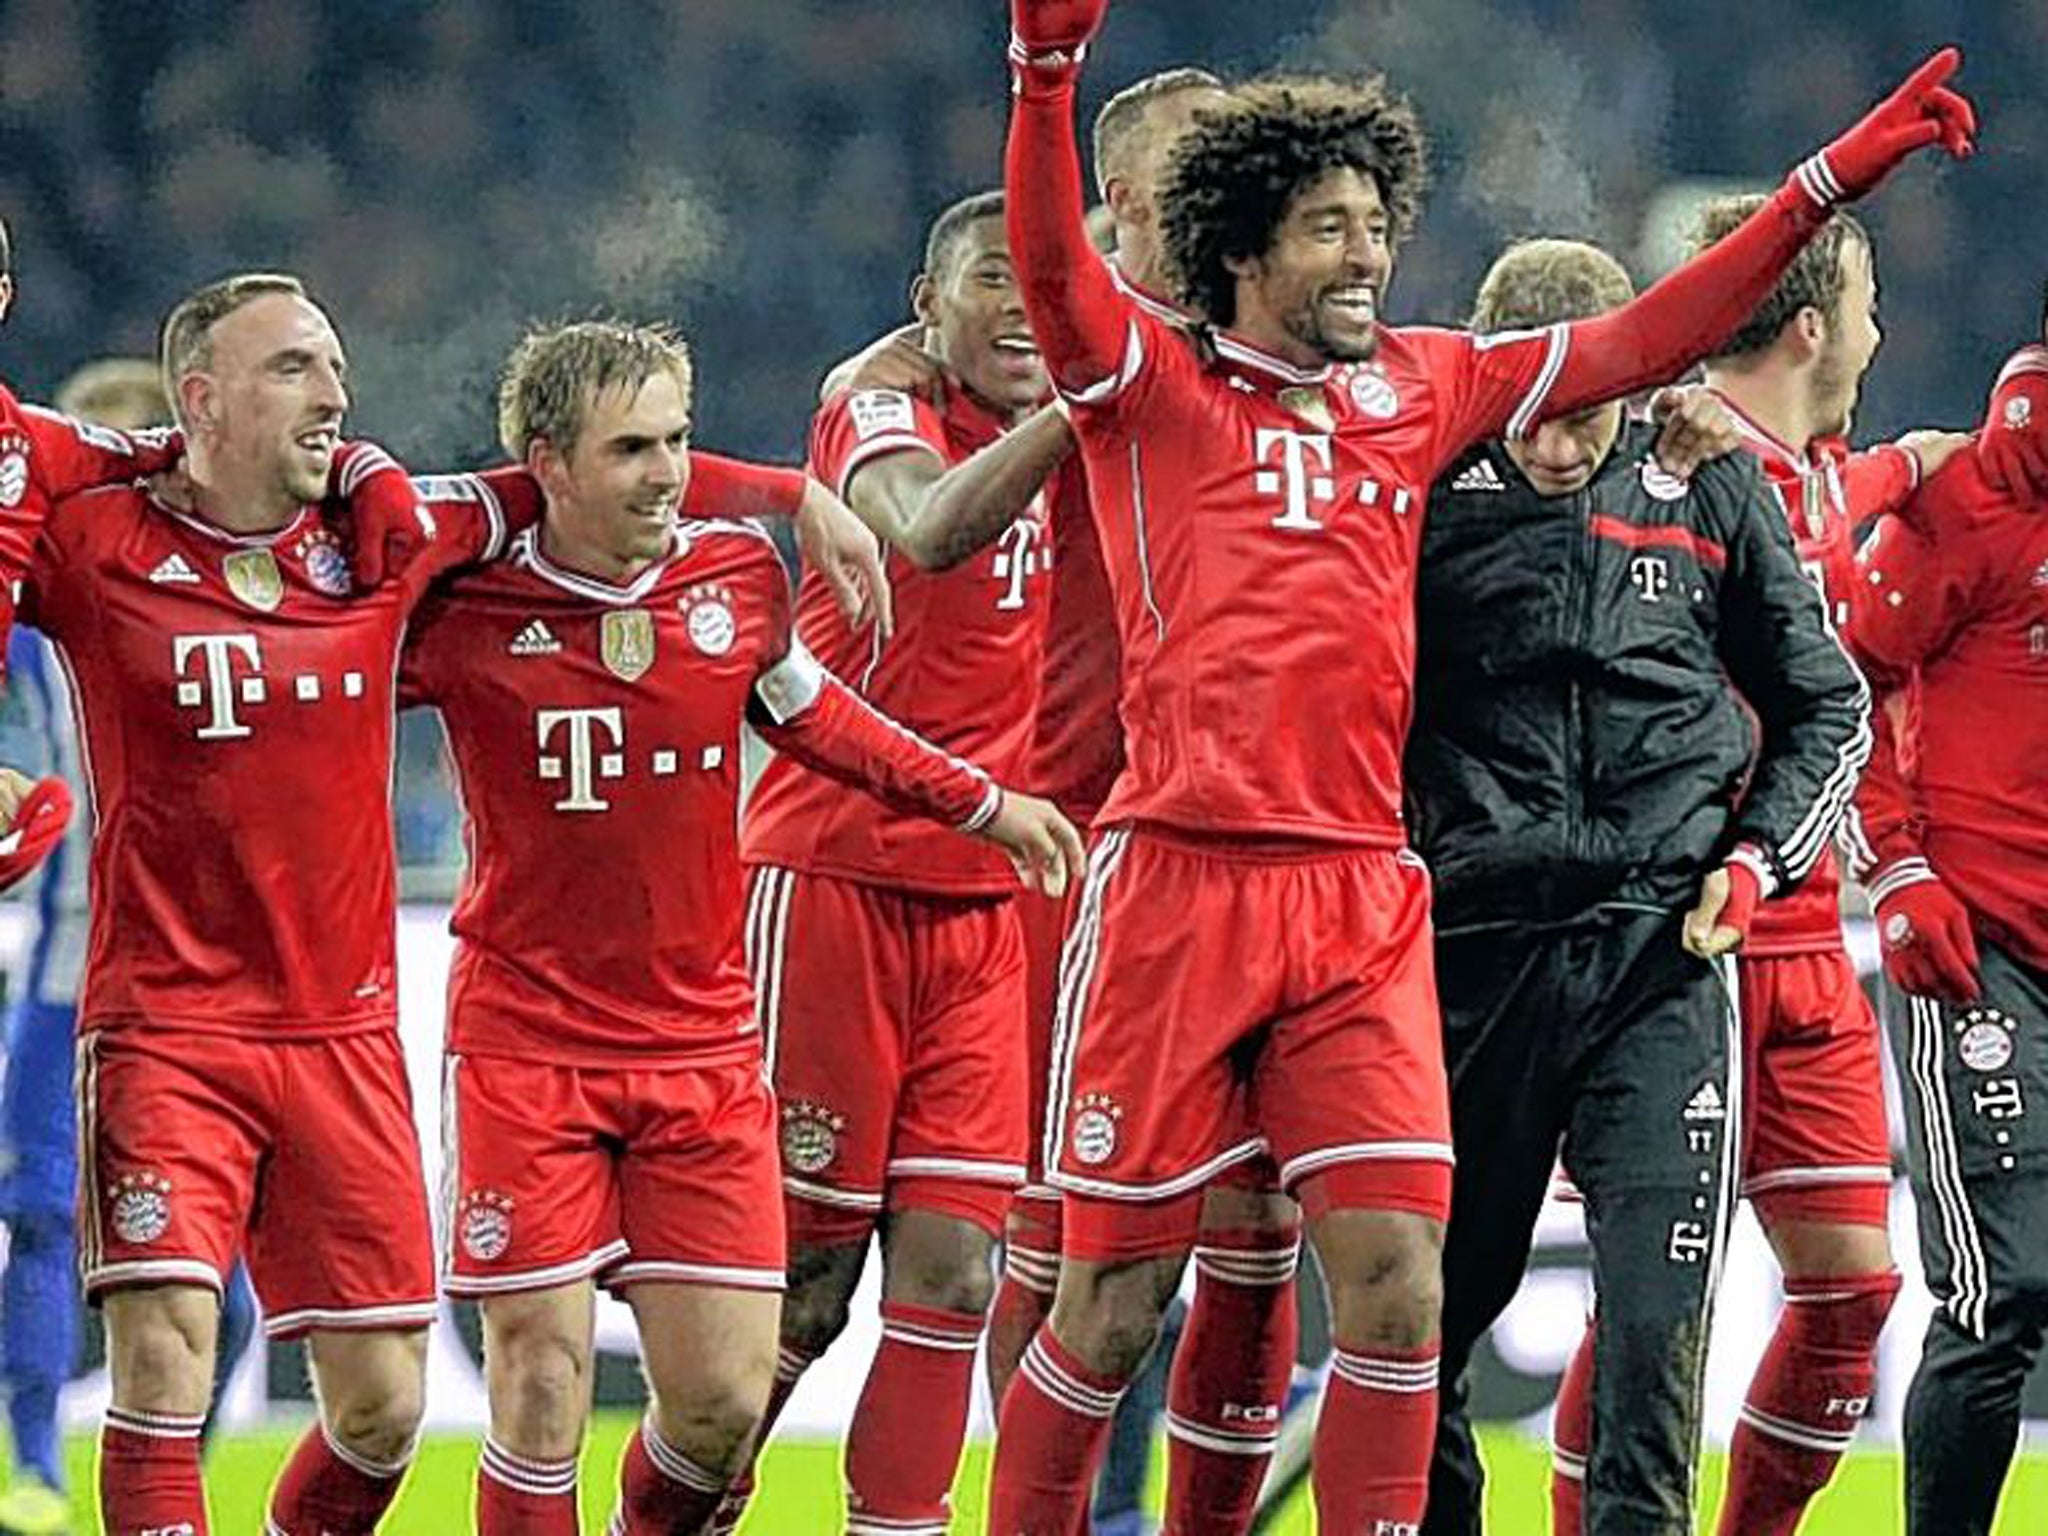 Deutsch courage: New tactical thinking helped Bayern win the Champions’ League last season, one leg of their Treble